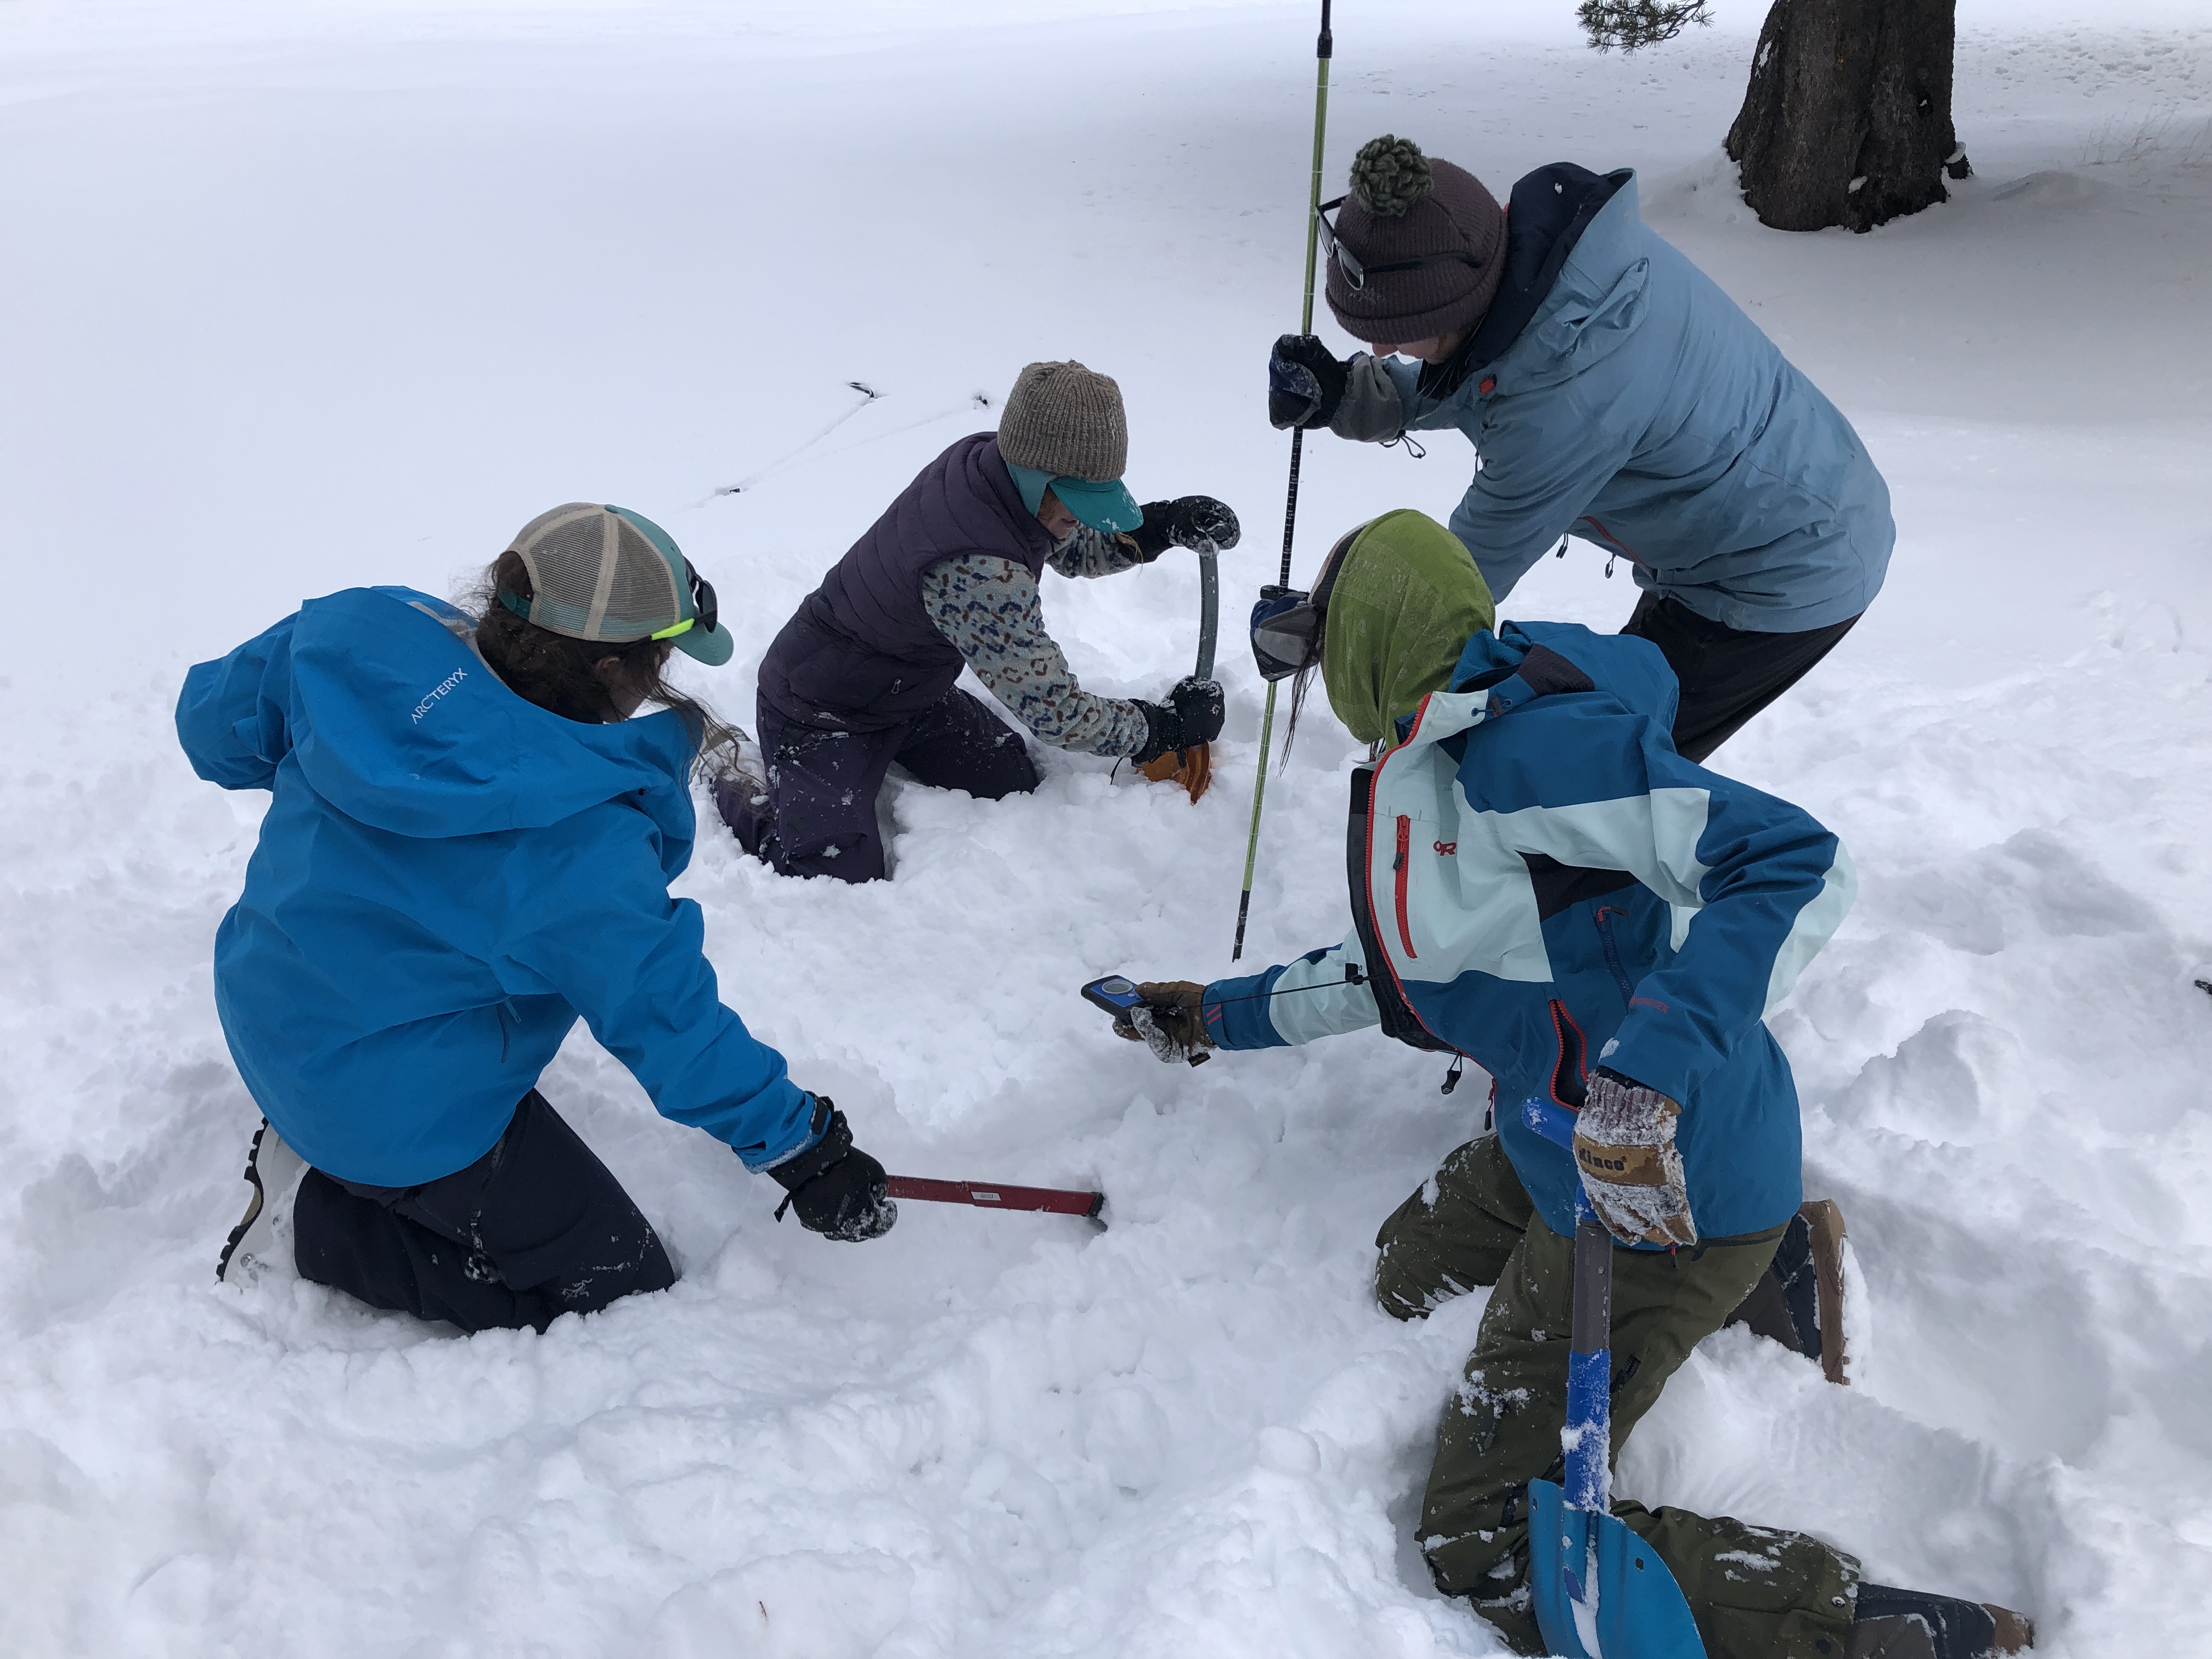 Dani Reyes-Acosta joins Backcountry Babes for their Companion Rescue course in South Lake Tahoe, California.